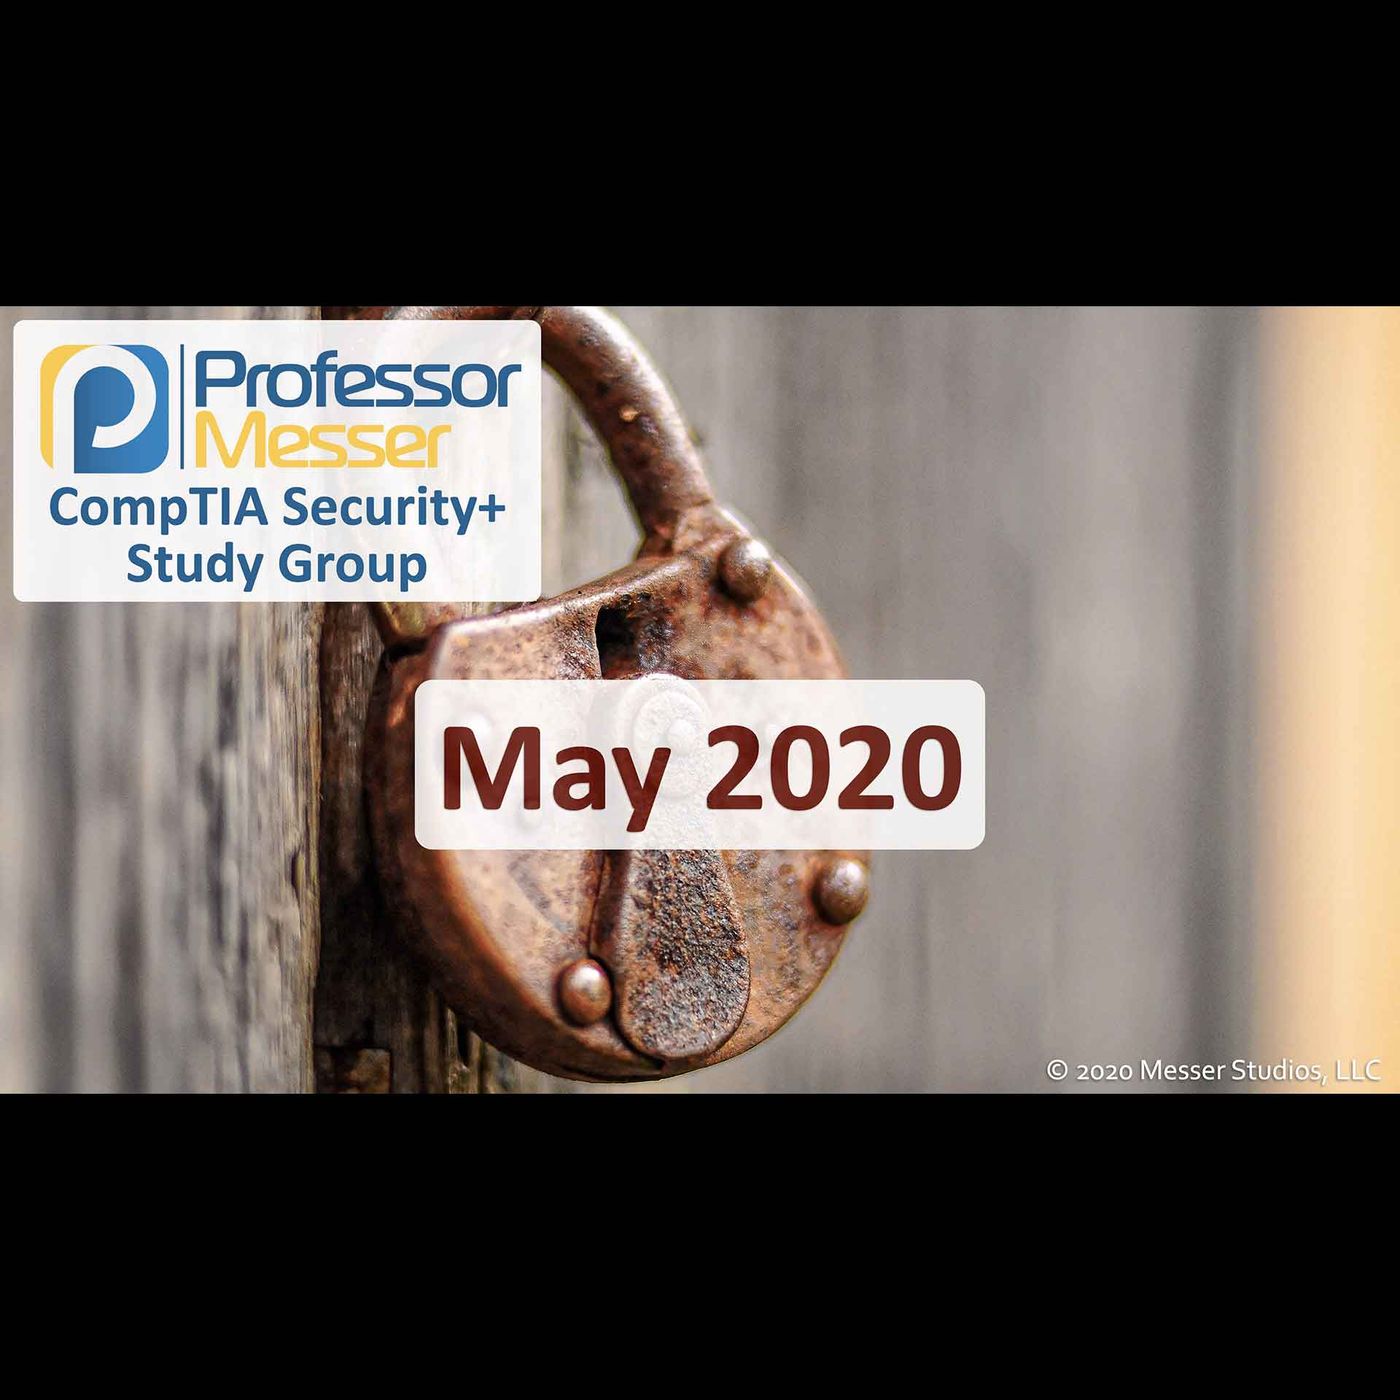 Professor Messer's Security+ Study Group - May 2020